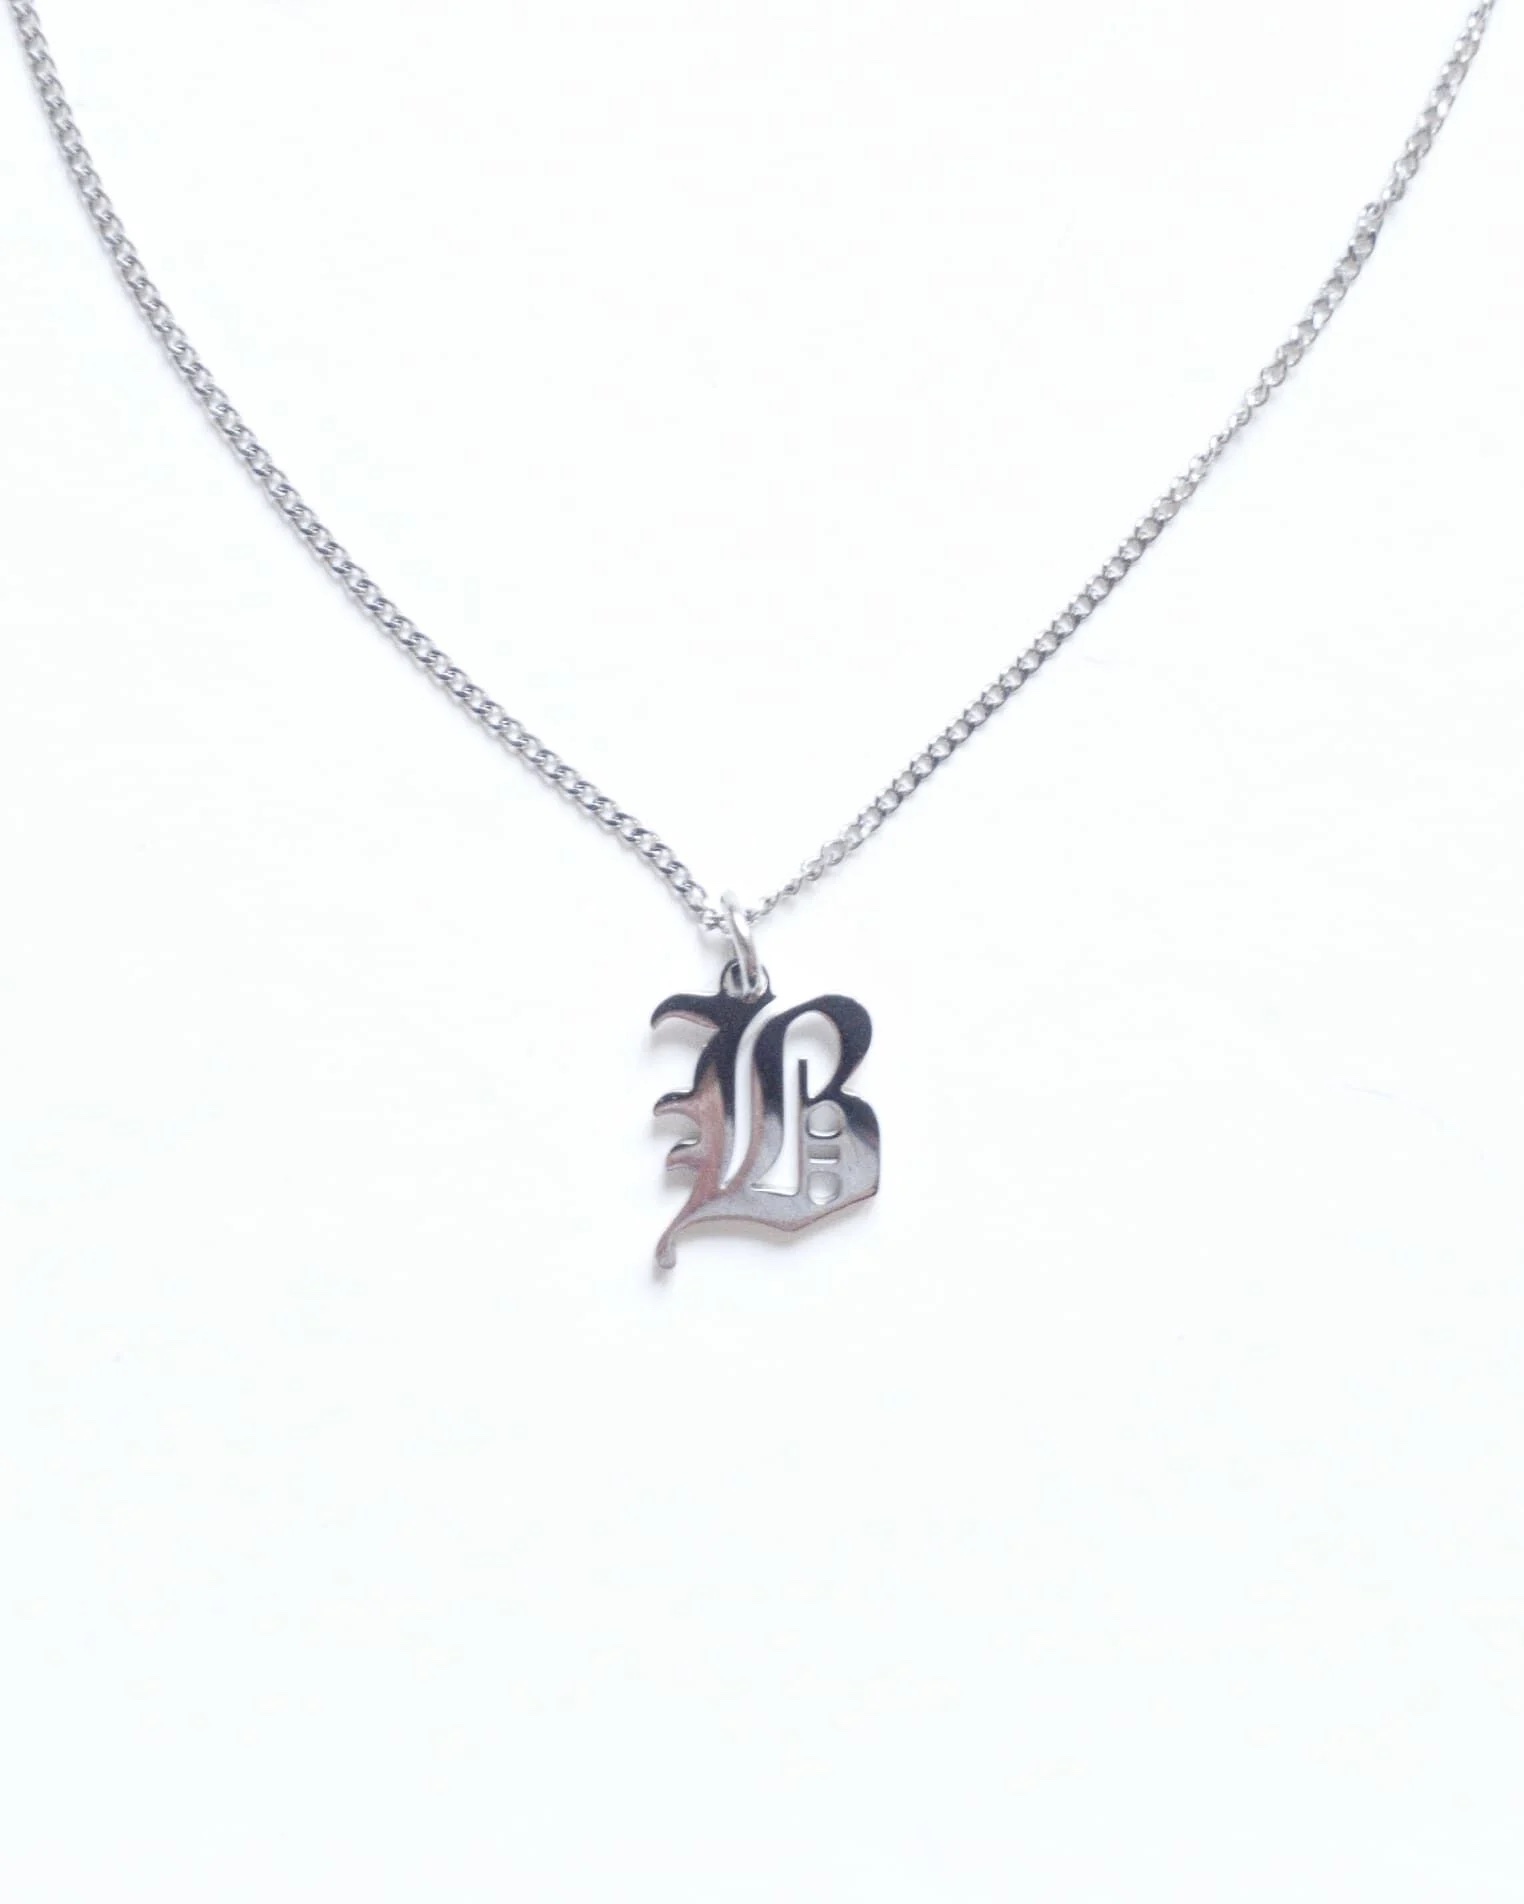 B NECKLACE - SILVER